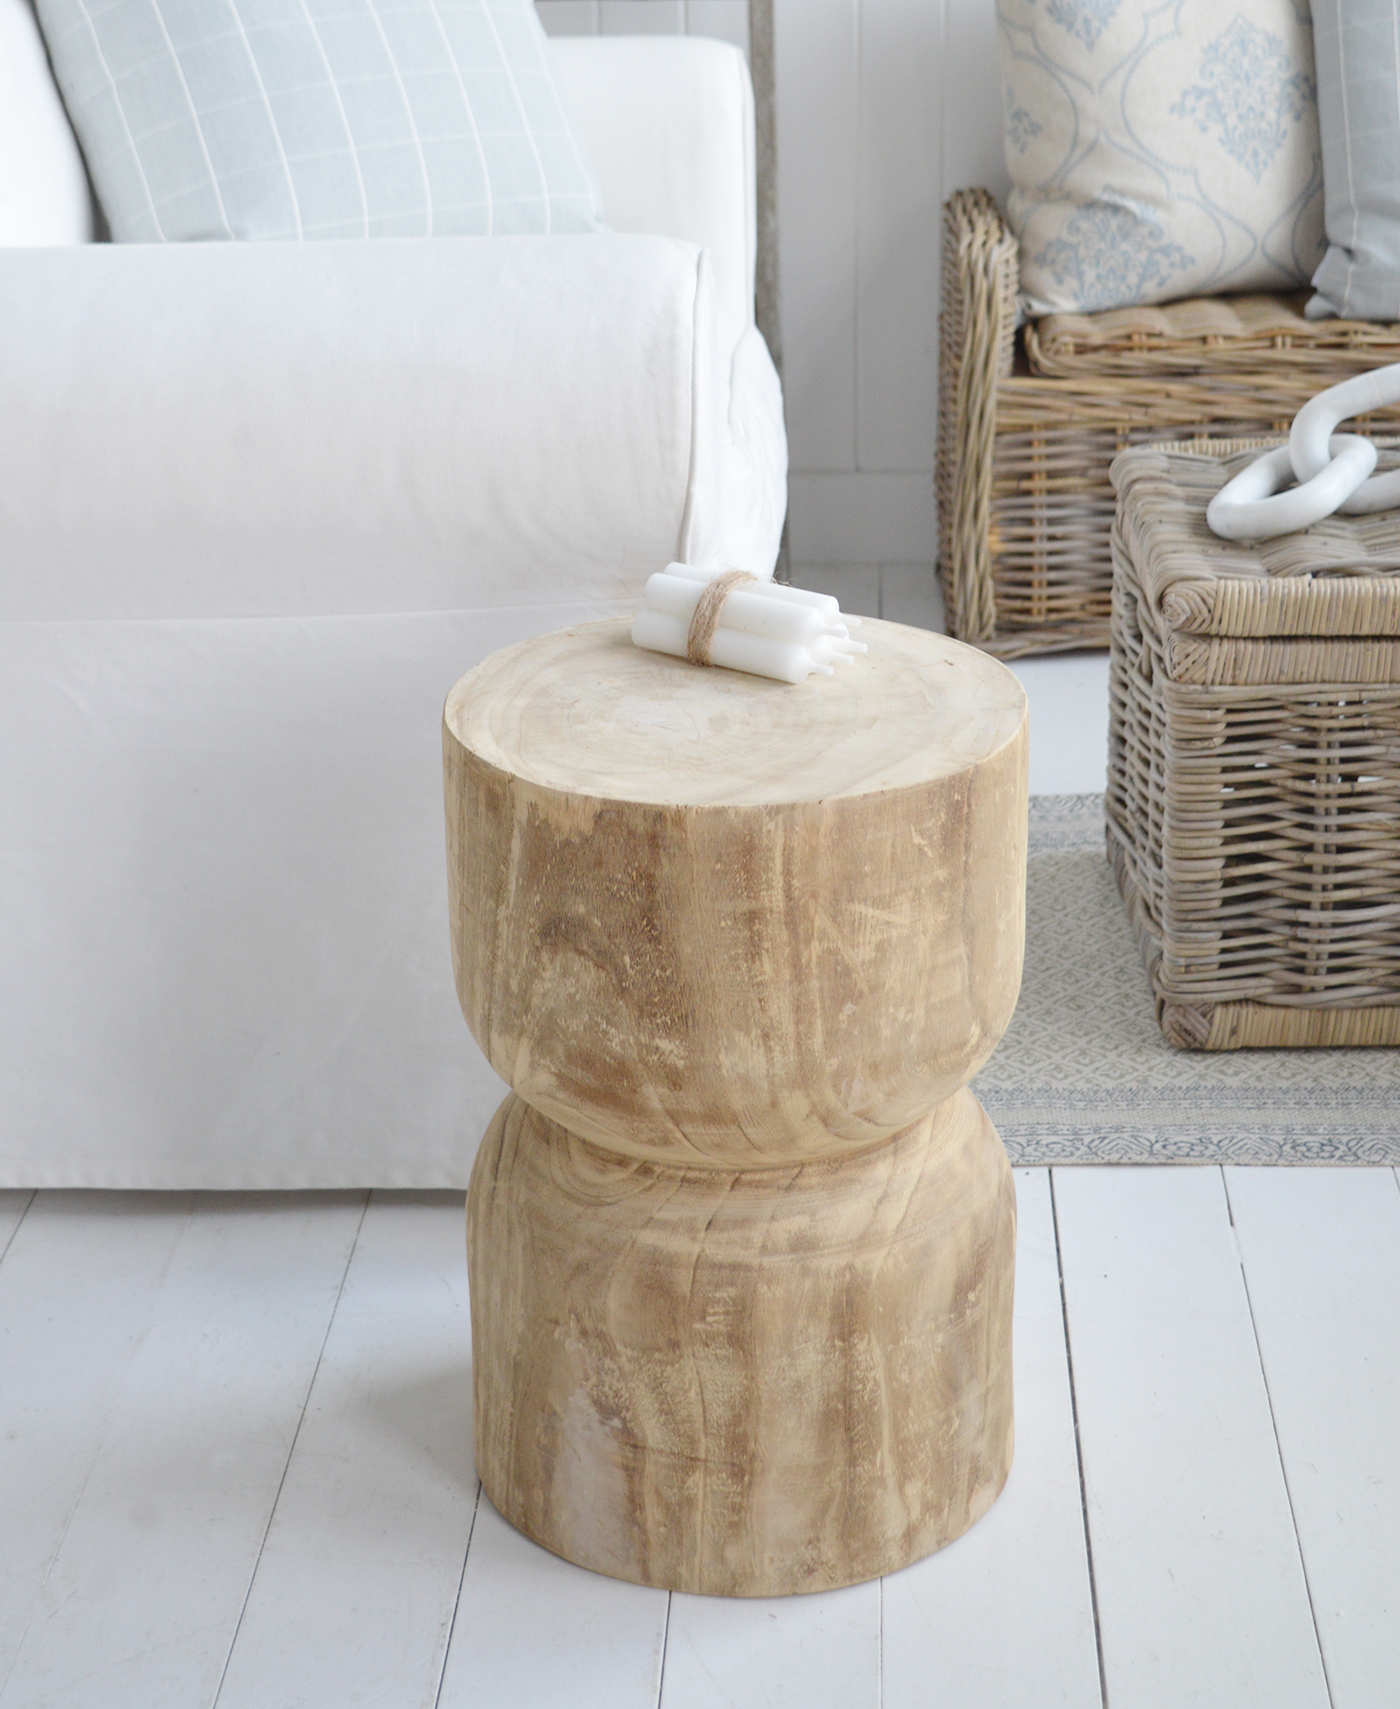 Ascot Wooden Handcarved Side Table. Elegant New England Coastal and Modern Farmhouse Furniture